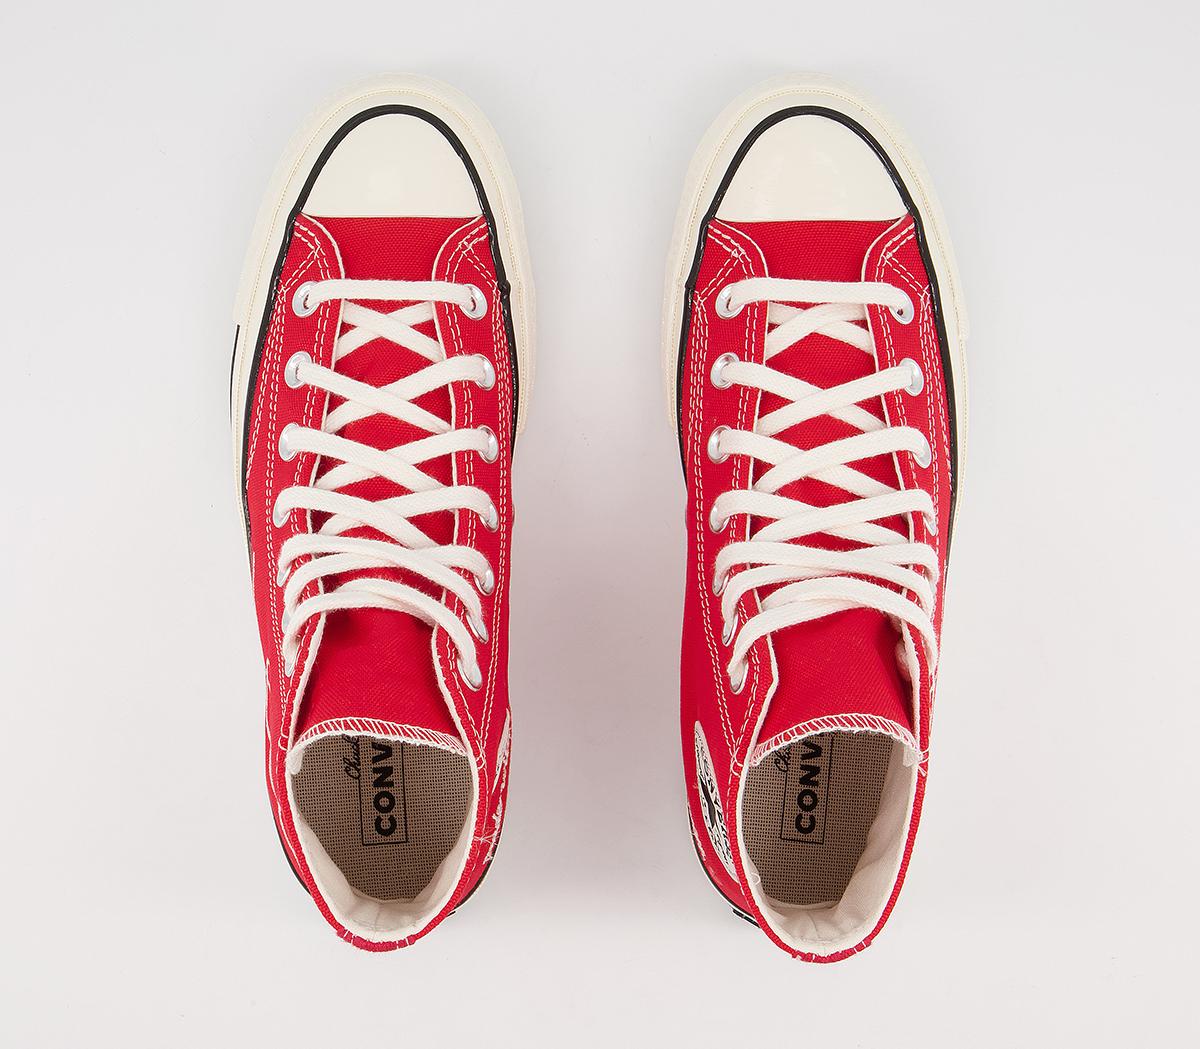 Converse All Star Hi 70s Trainers University Red Egret Love - Women's ...